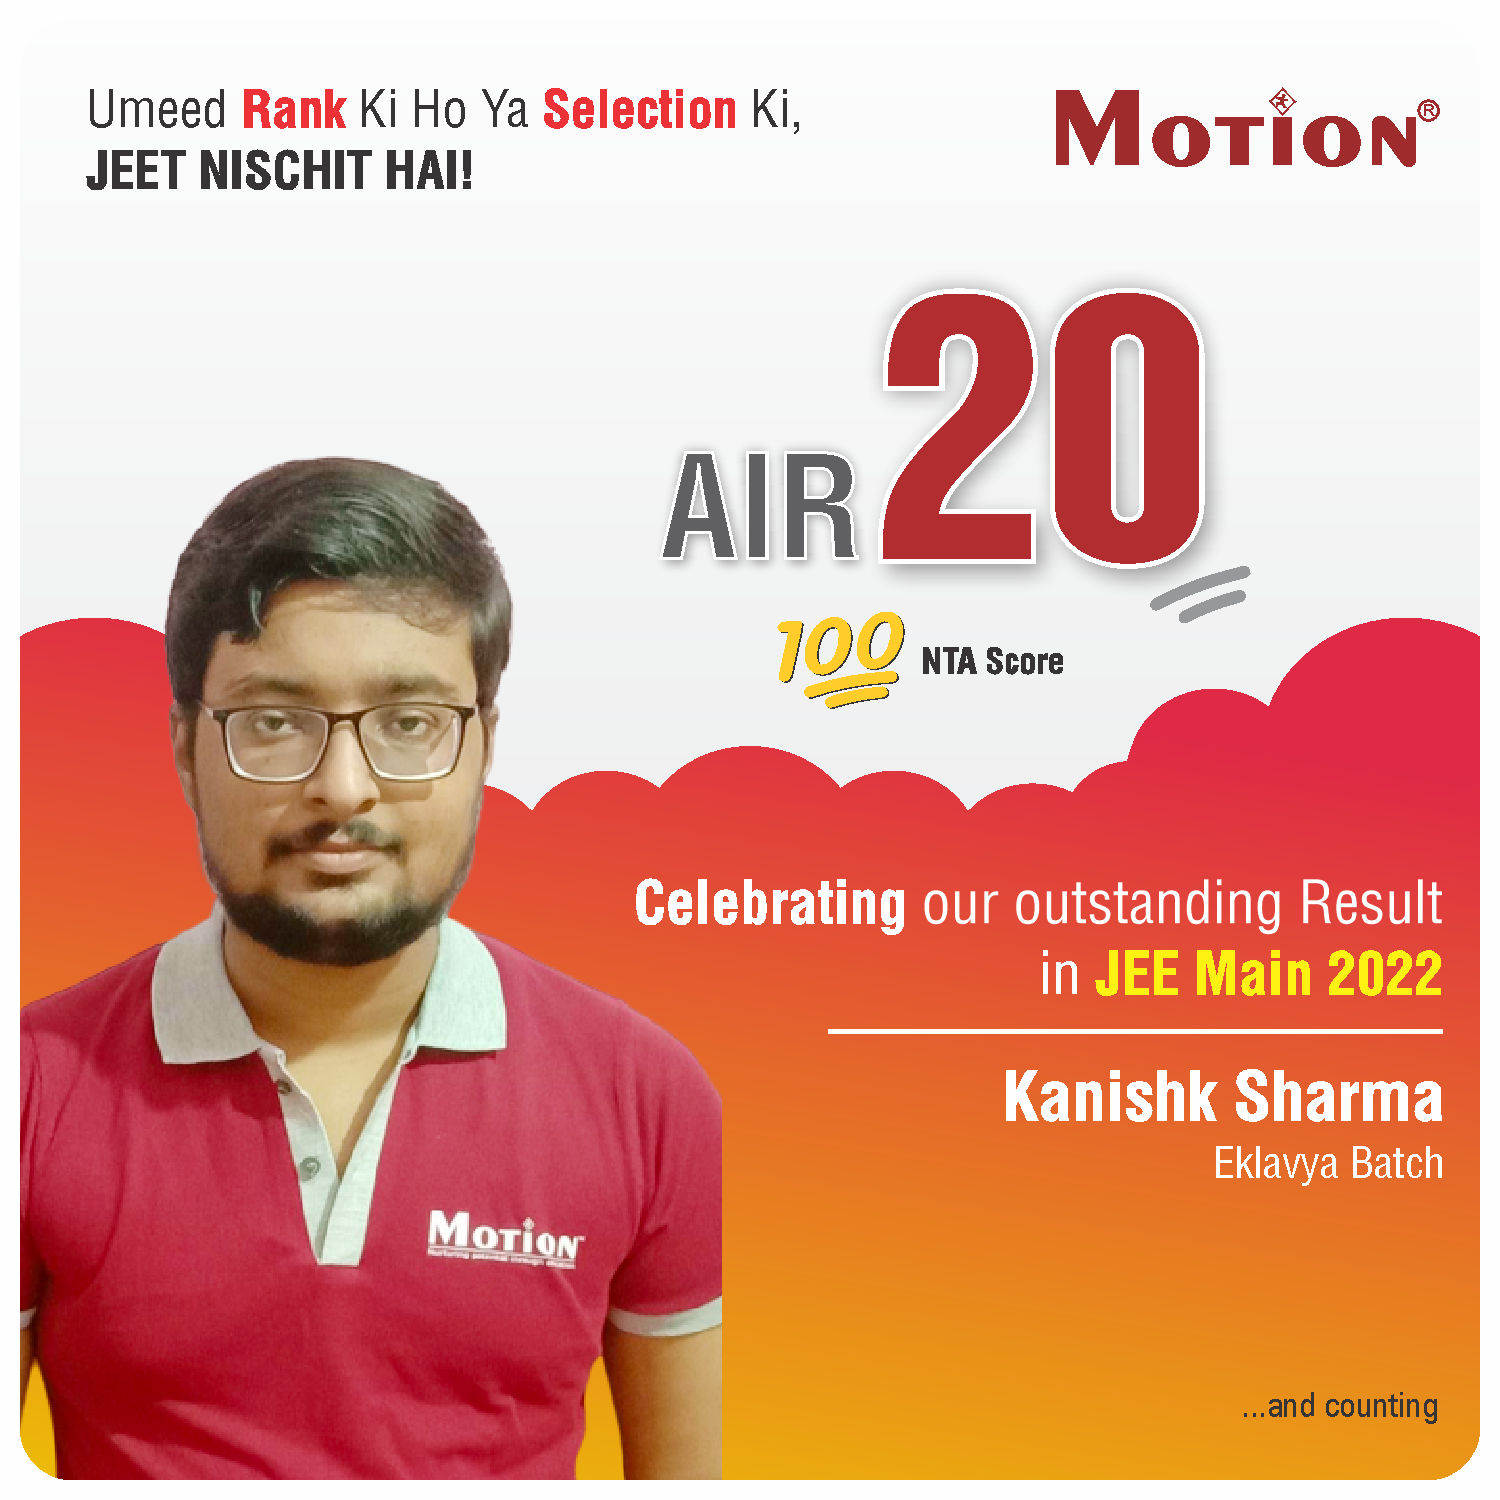 JEE Main Result 2022 Motion AIR 20